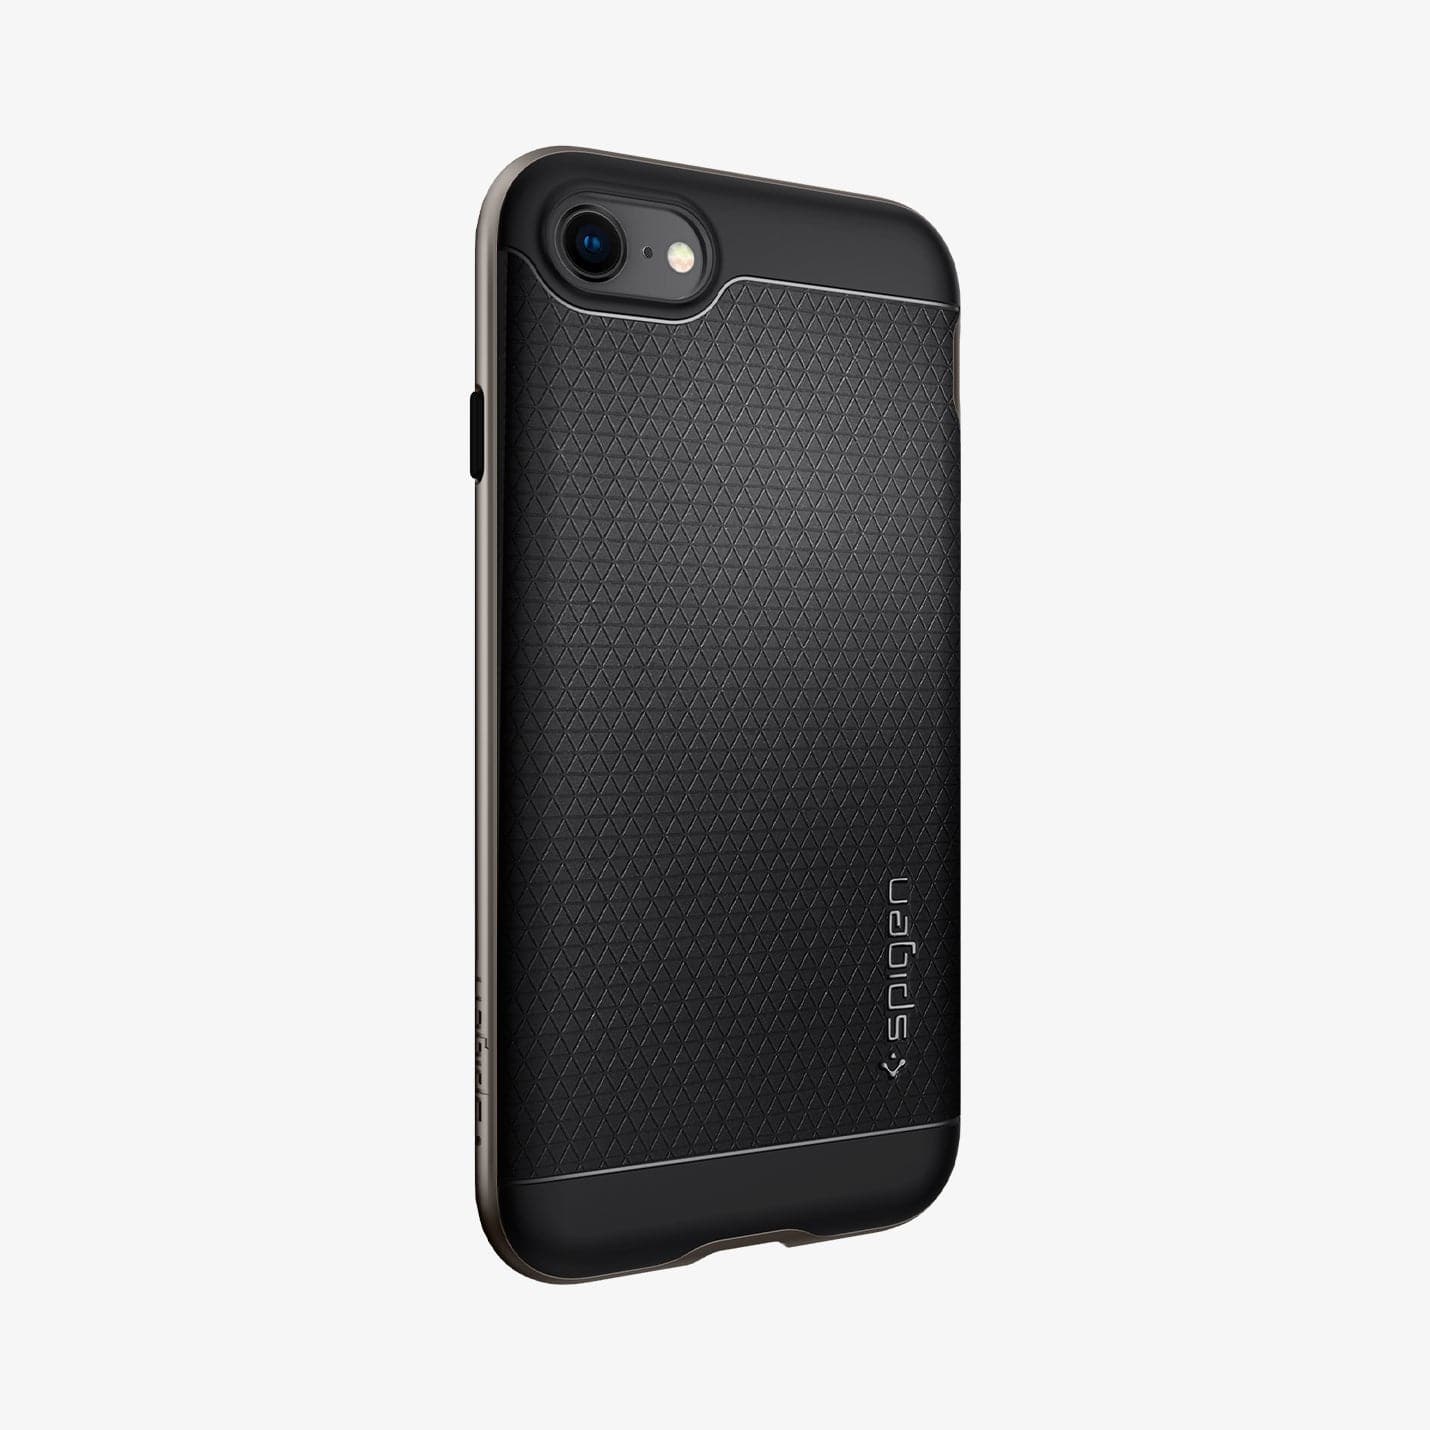 054CS22358 - iPhone 8 Series Neo Hybrid Case in Gunmetal showing the back, partial side